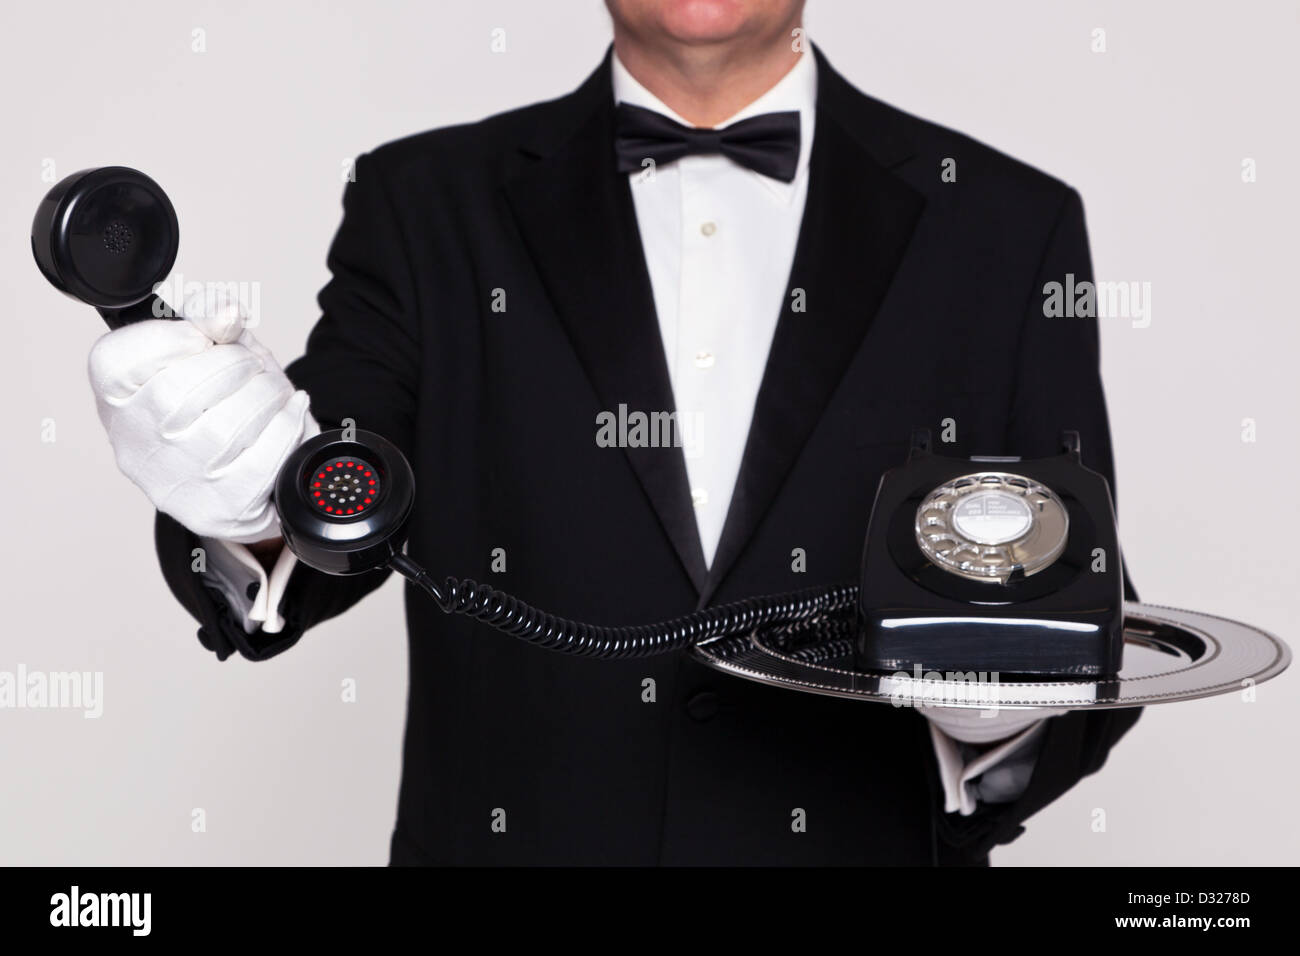 Butler handing you the receiver from a retro telephone upon a silver serving tray. Stock Photo